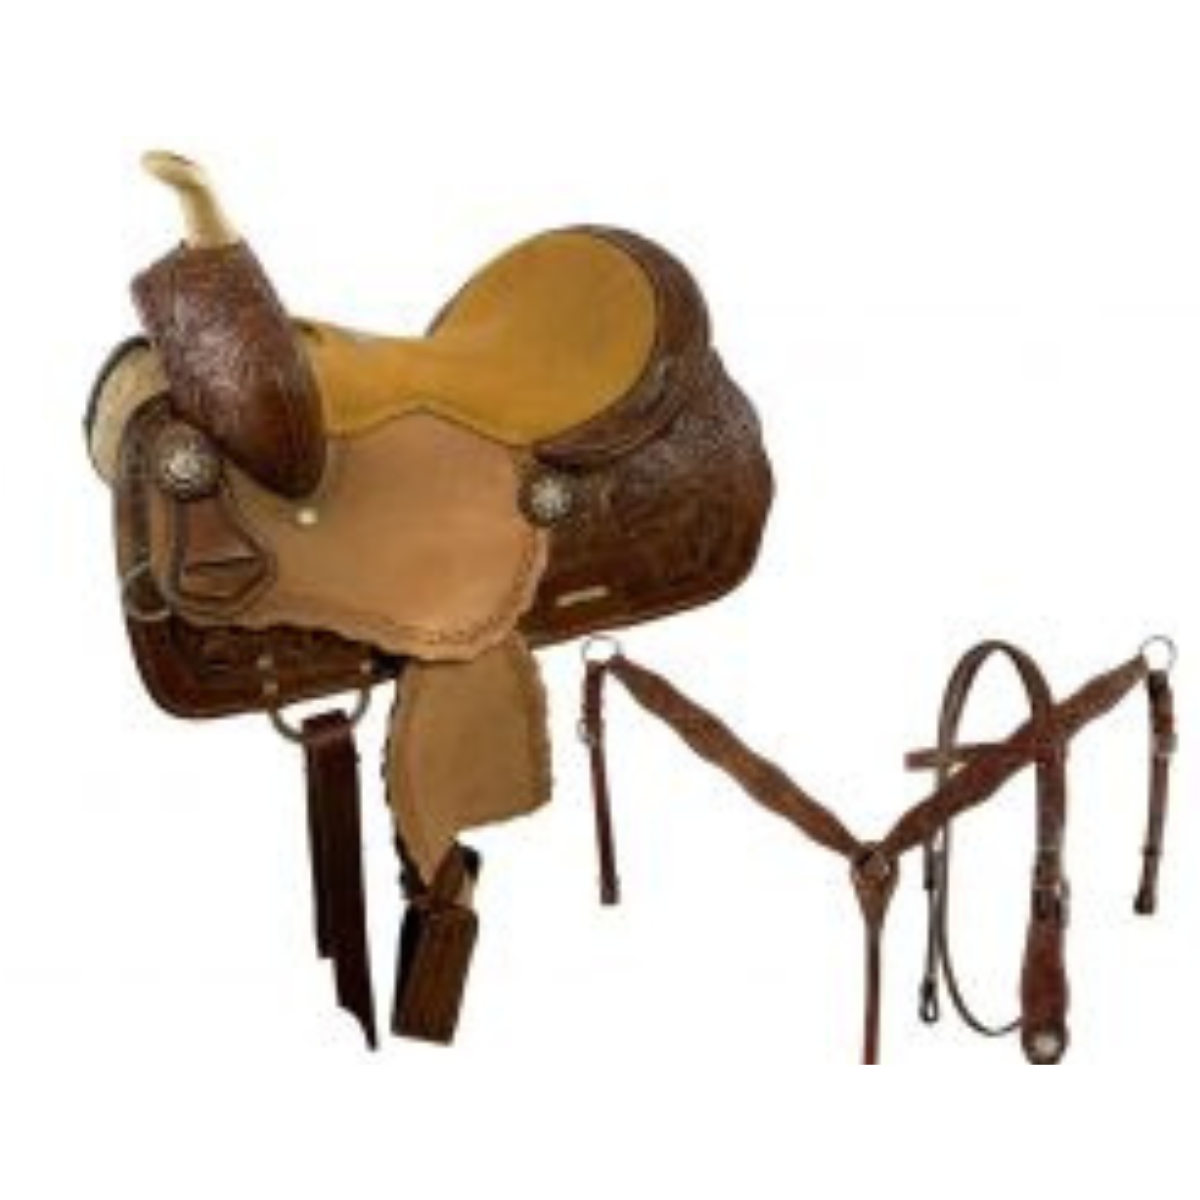 12" DOUBLE T  MEDIUM OIL YOUTH BARREL STYLE SADDLE SET WITH SUEDE SEAT - Double T Saddles